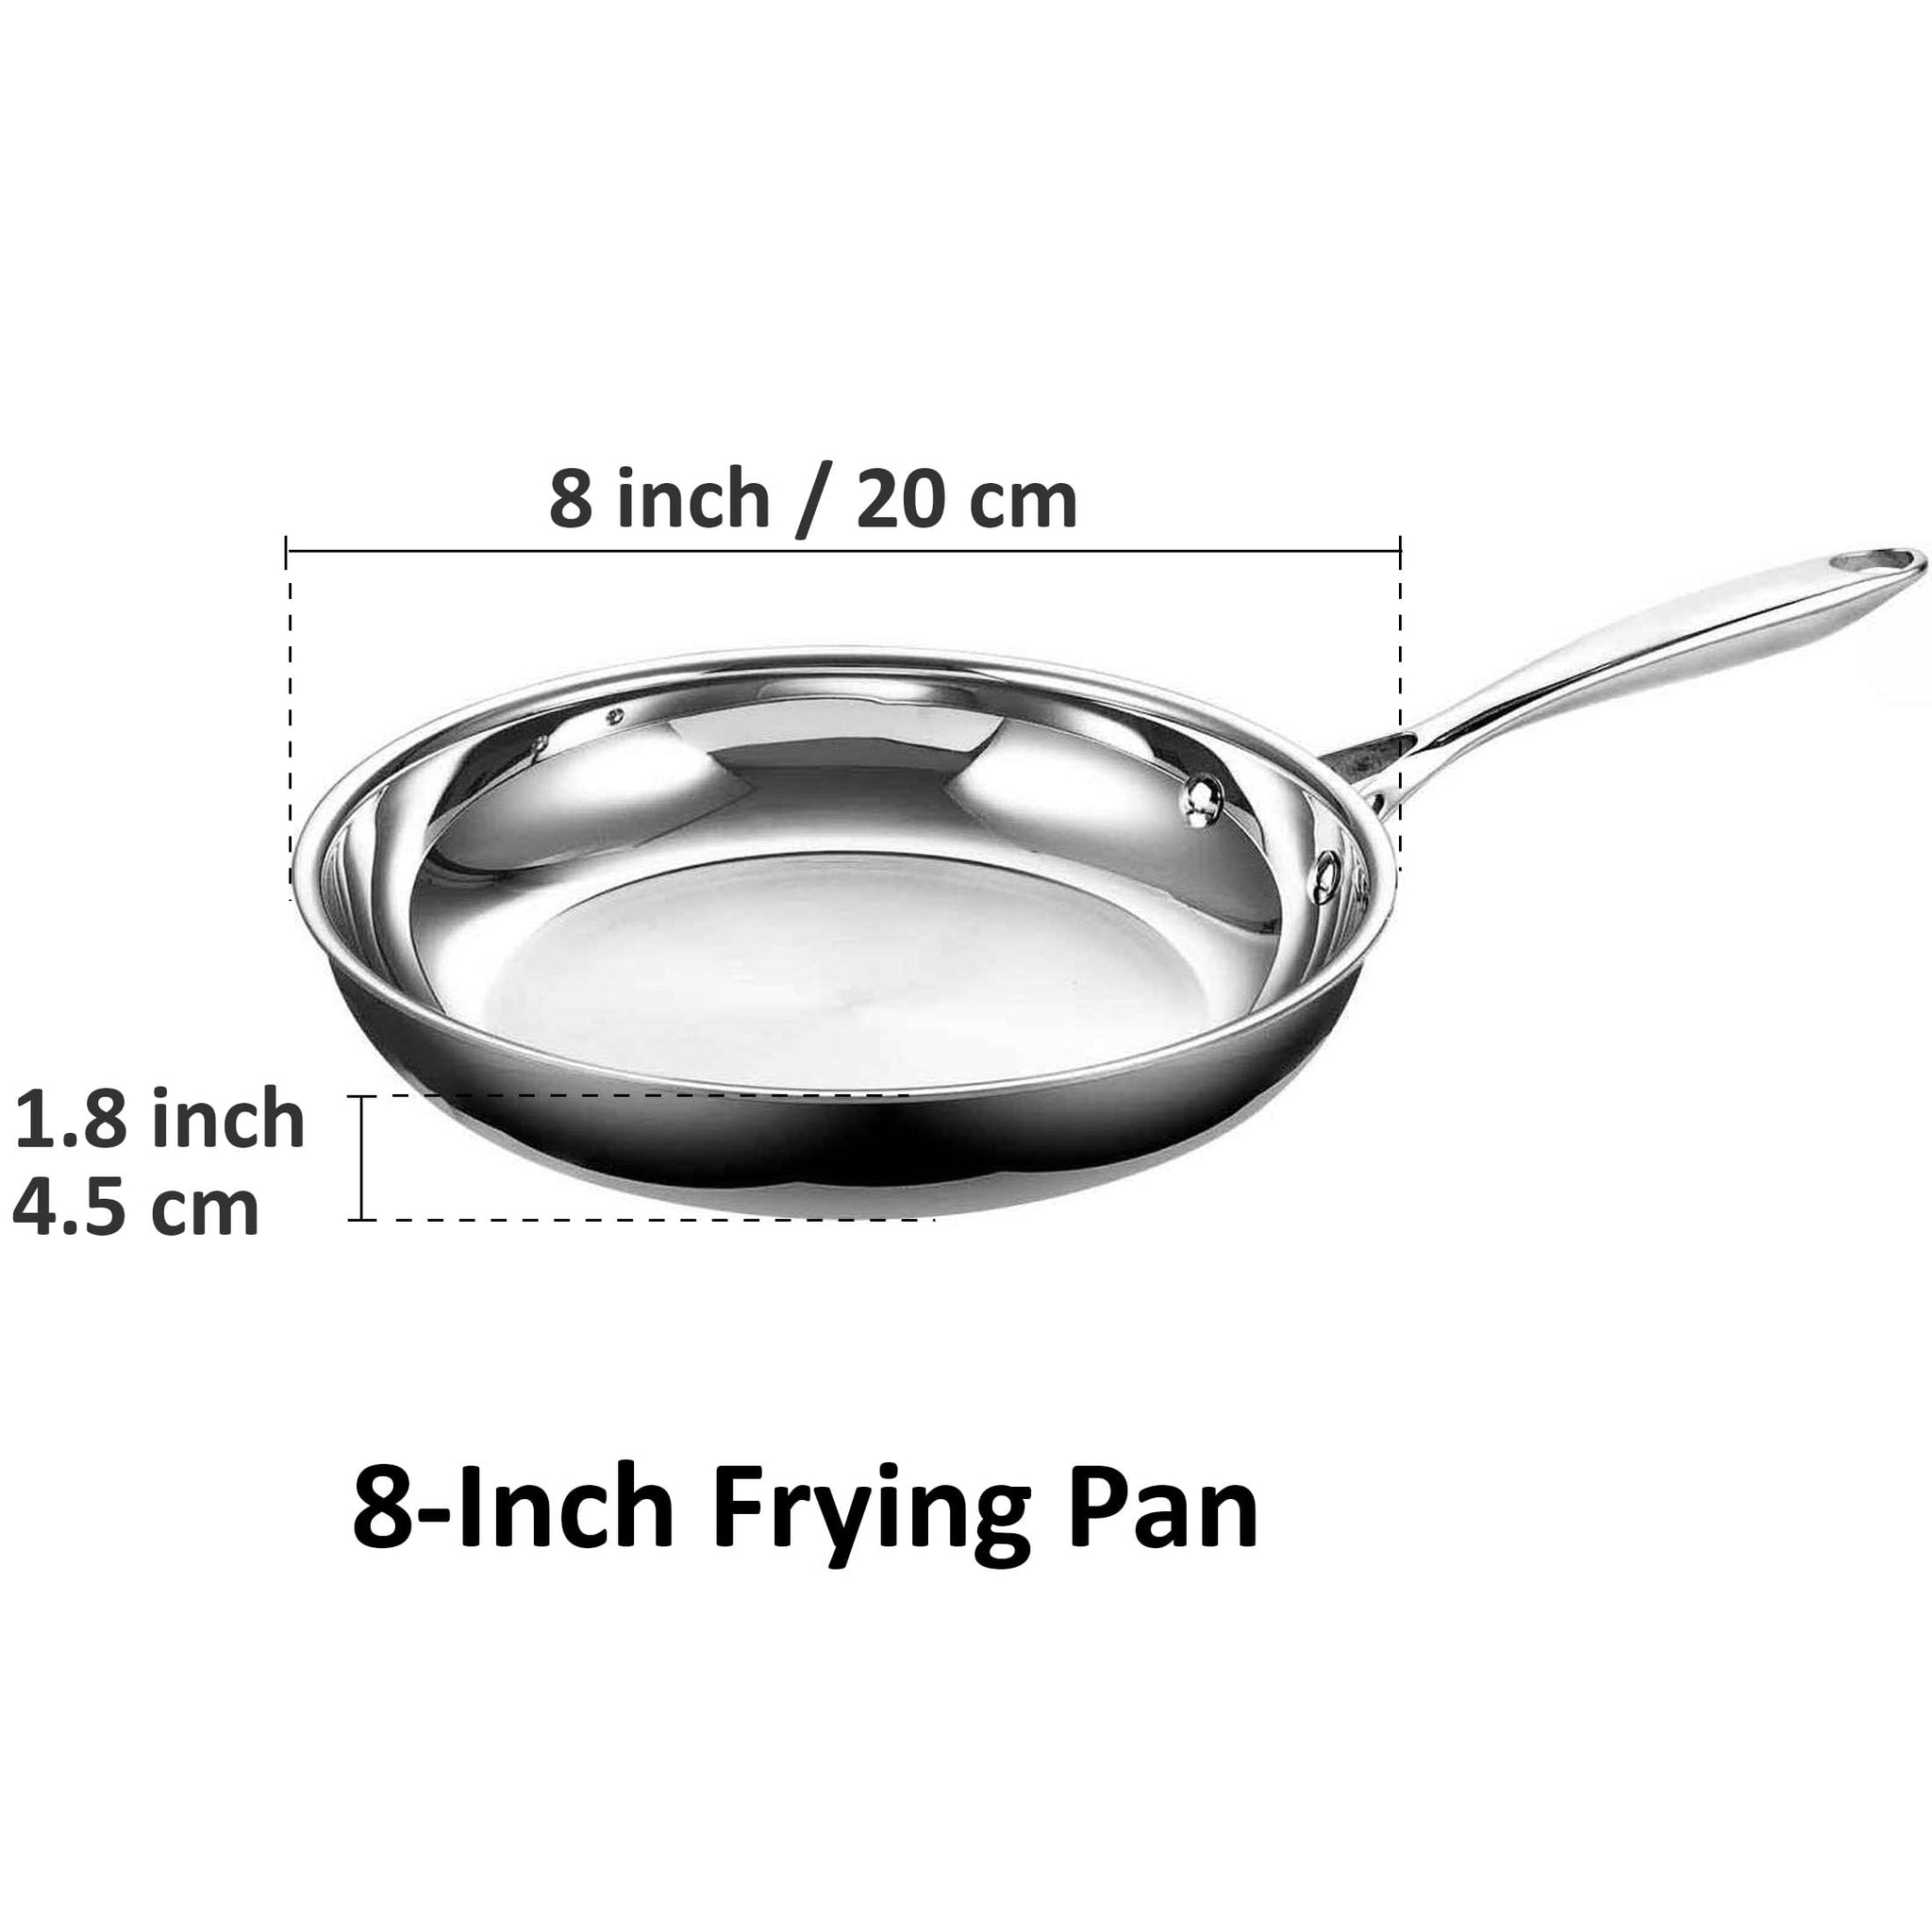 Cooks Standard Frying Pan Stainless Steel, 8-Inch Multi-Ply Clad